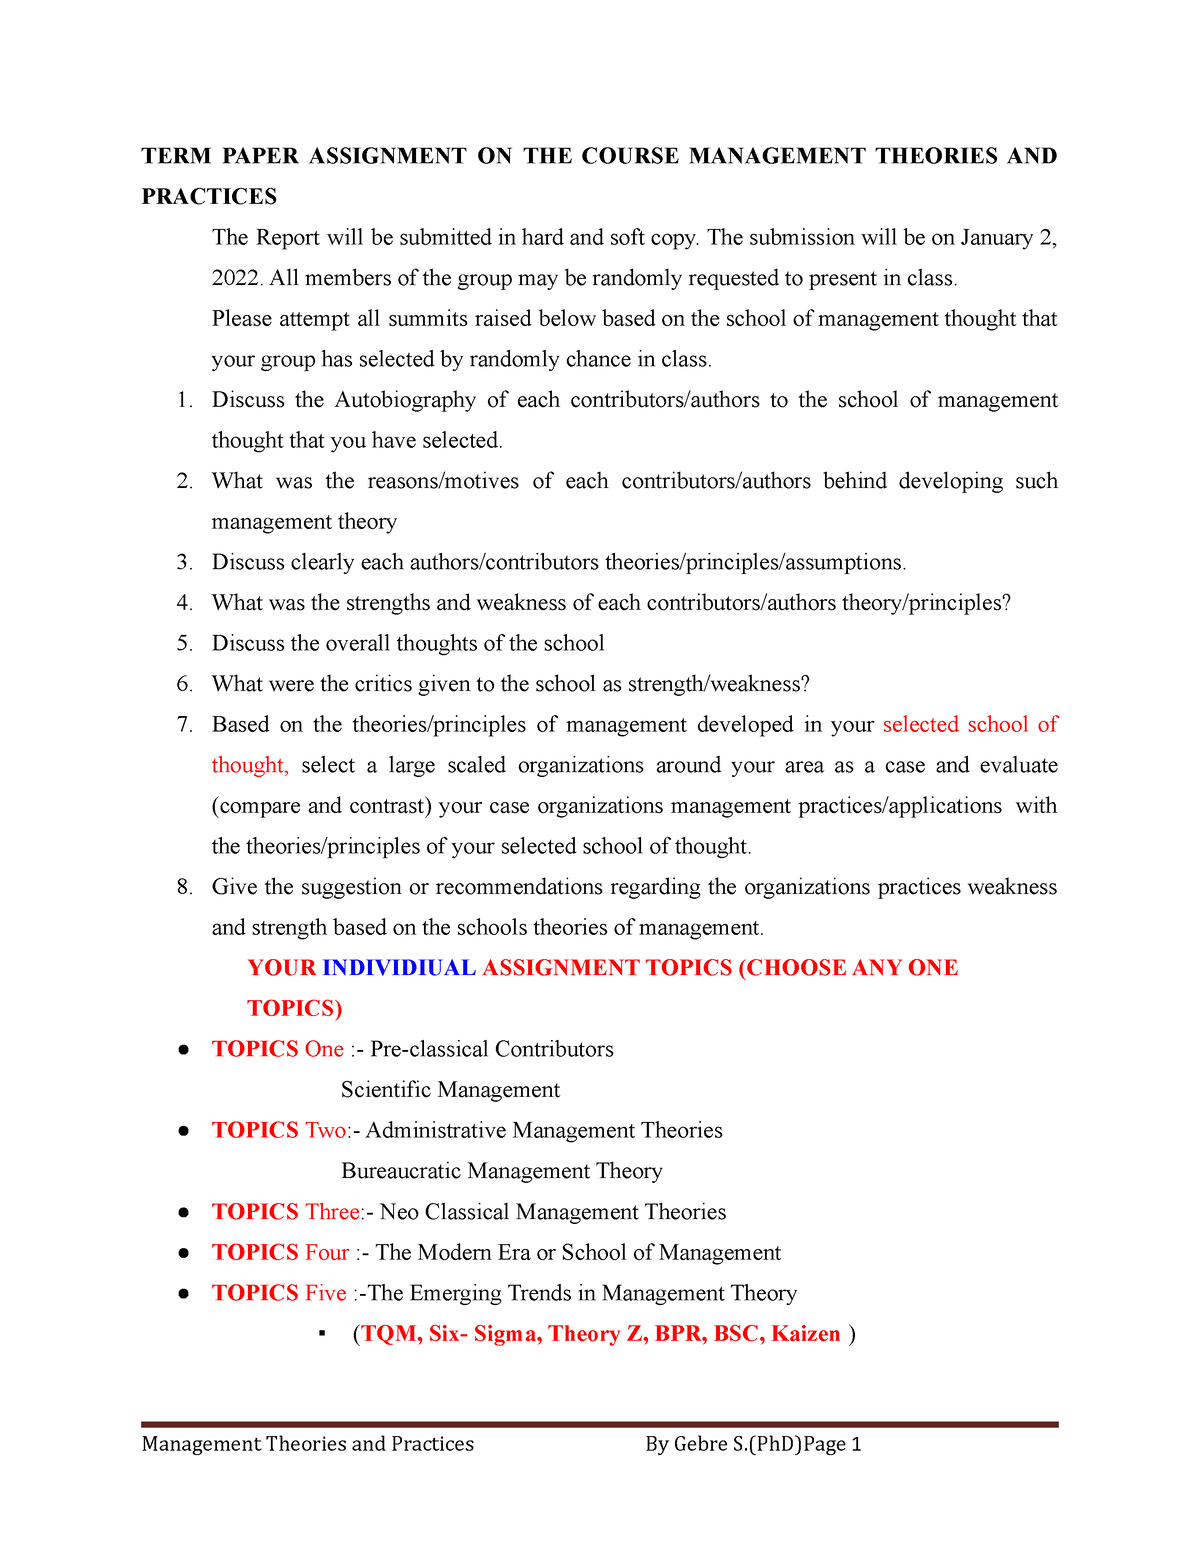 term paper assignment on the course management theories and practices